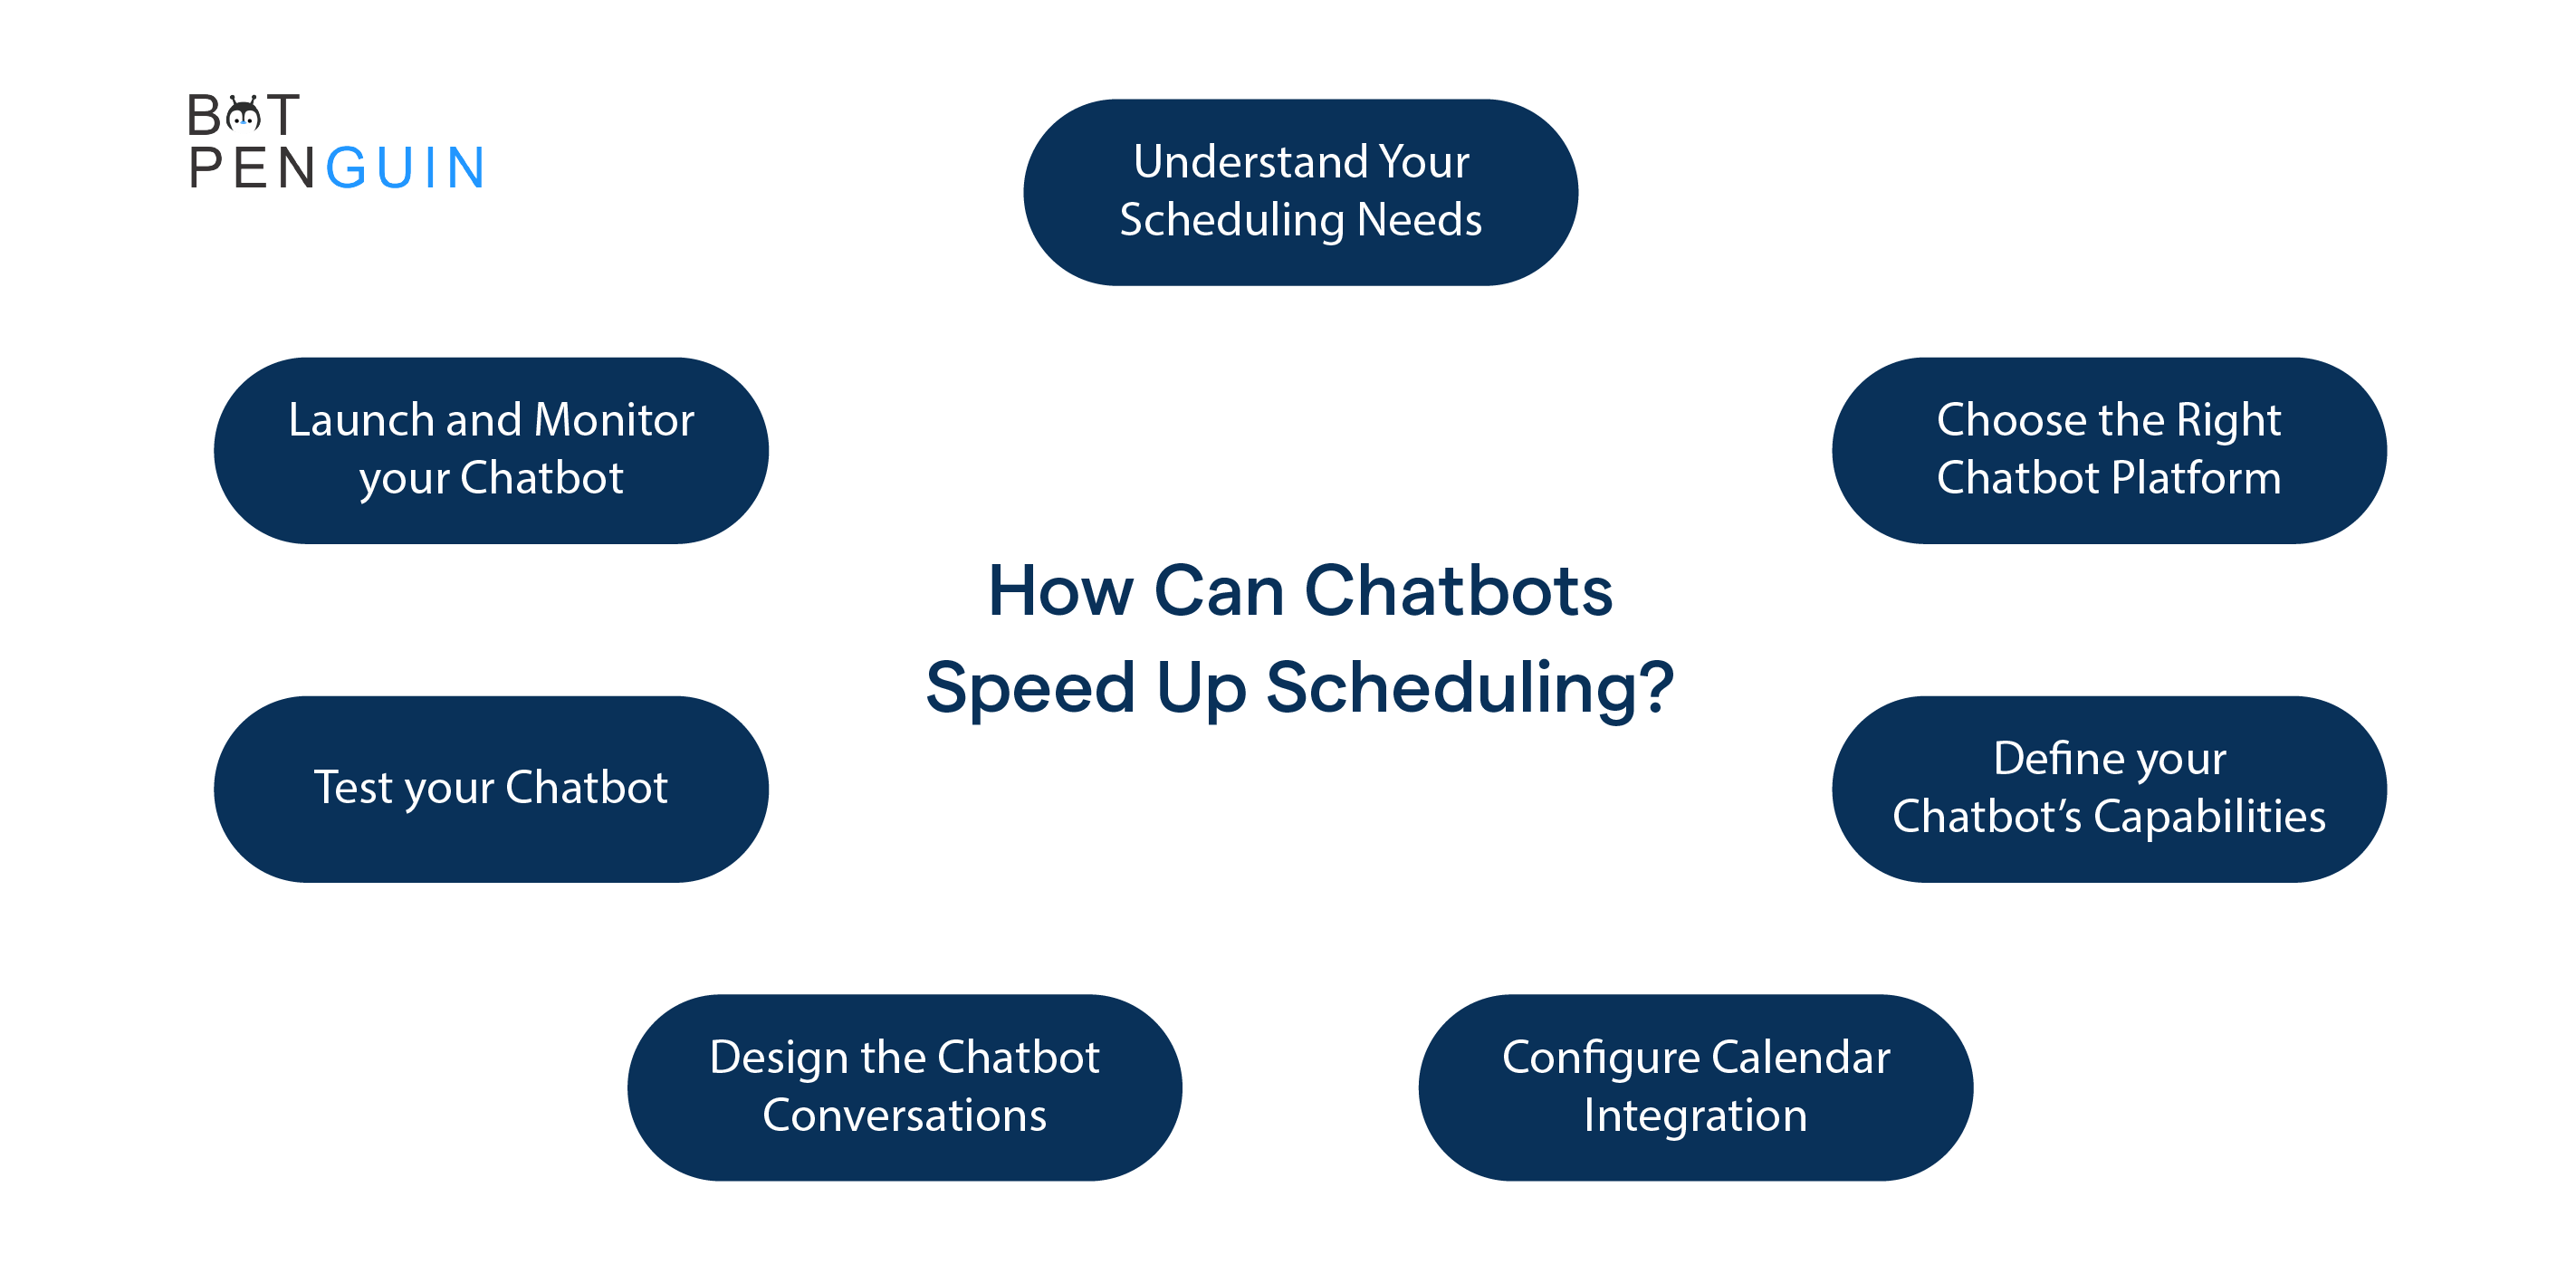 How to Implement Chatbot Integrations for Scheduling